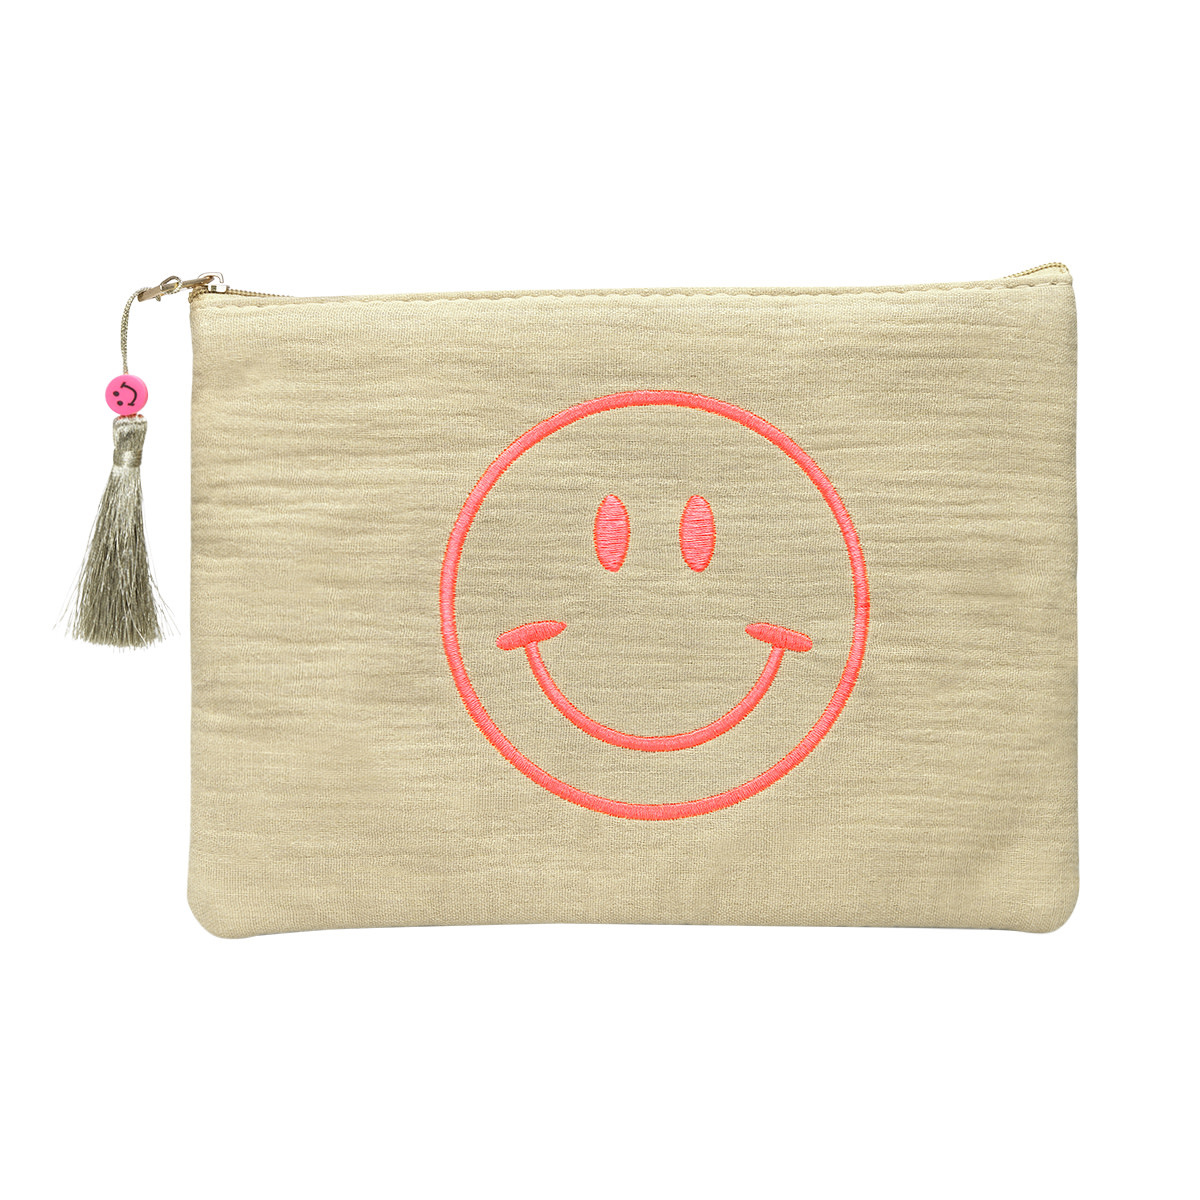 With love Pouch smiley neon pink  22cm x 16cm